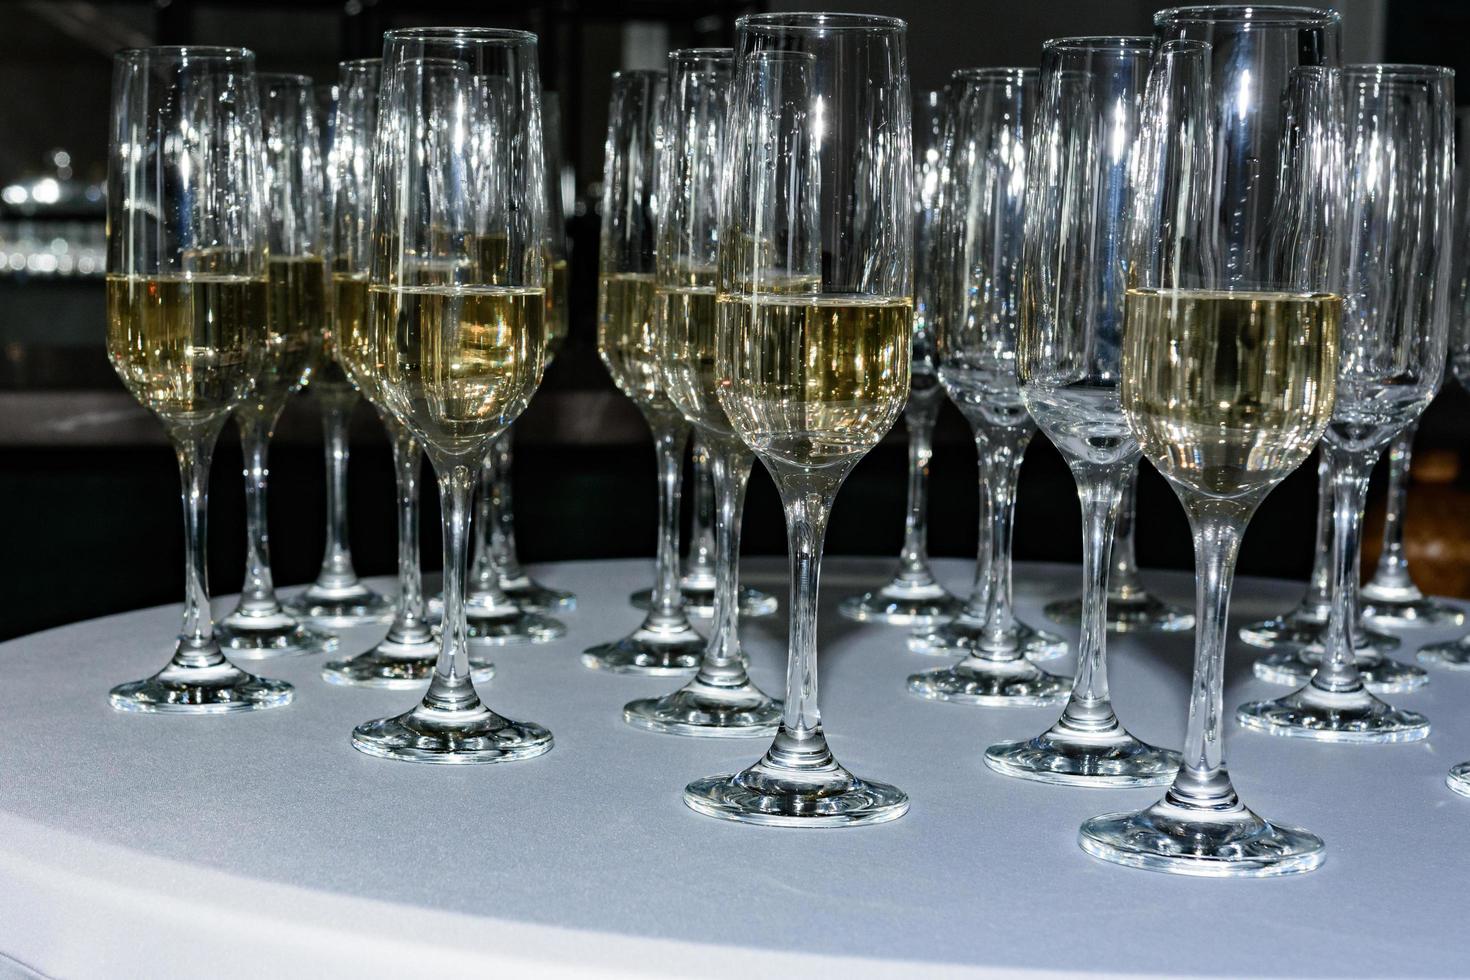 Serving champagne glasses at a solemn event. photo